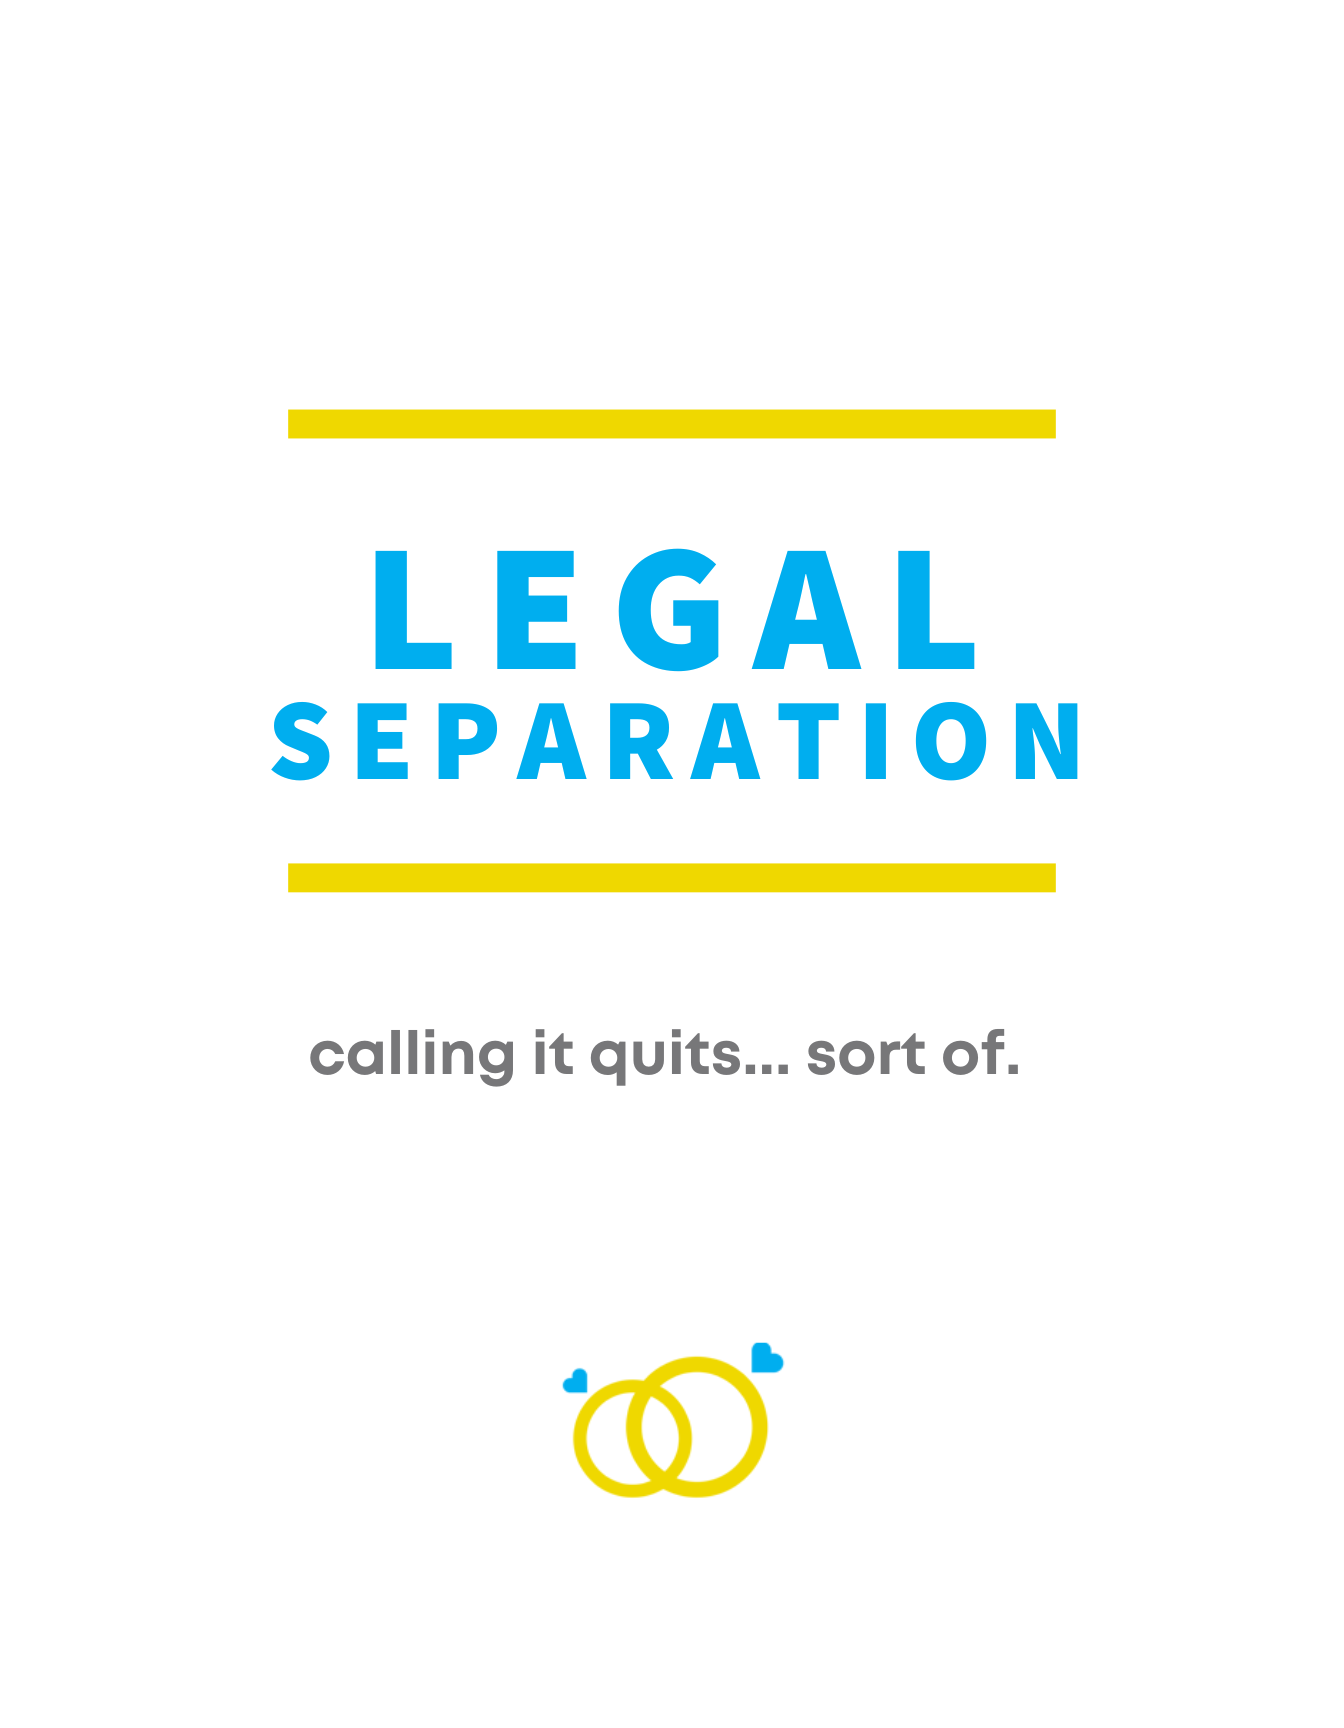 What is legal separation